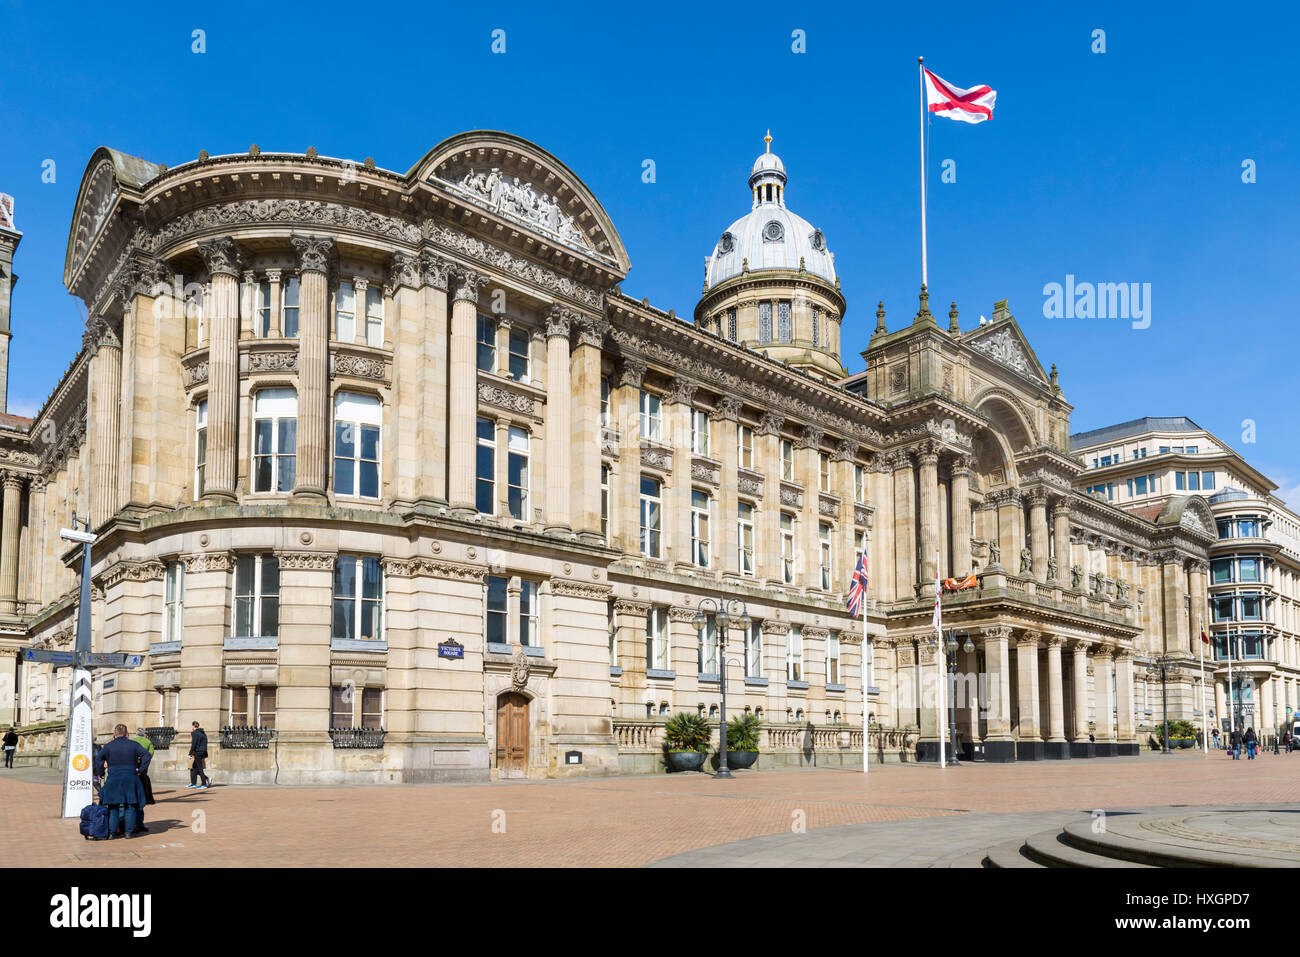 The Council House (incorporating the Birmingham Museum and Art Gallery), Victoria Square, Birmingham, West Midlands, England, UK Stock Photo